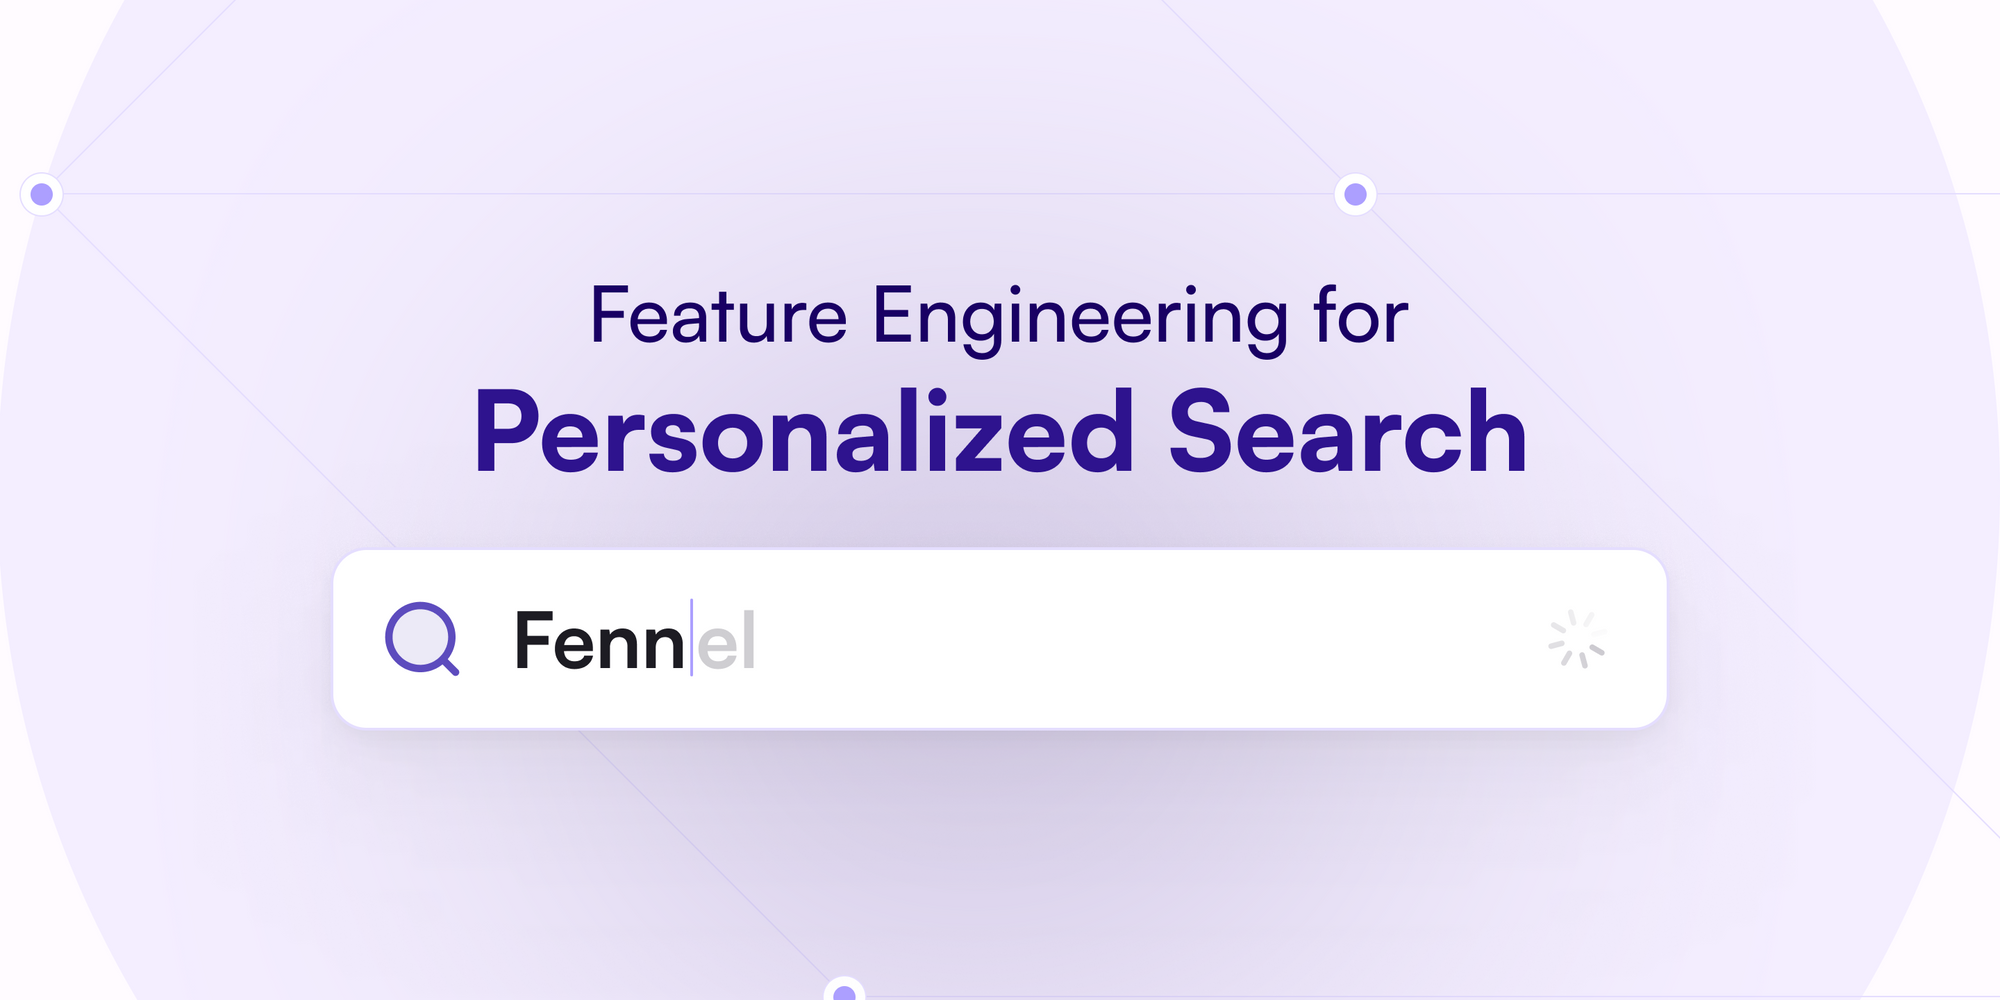 Feature Engineering for Personalized Search